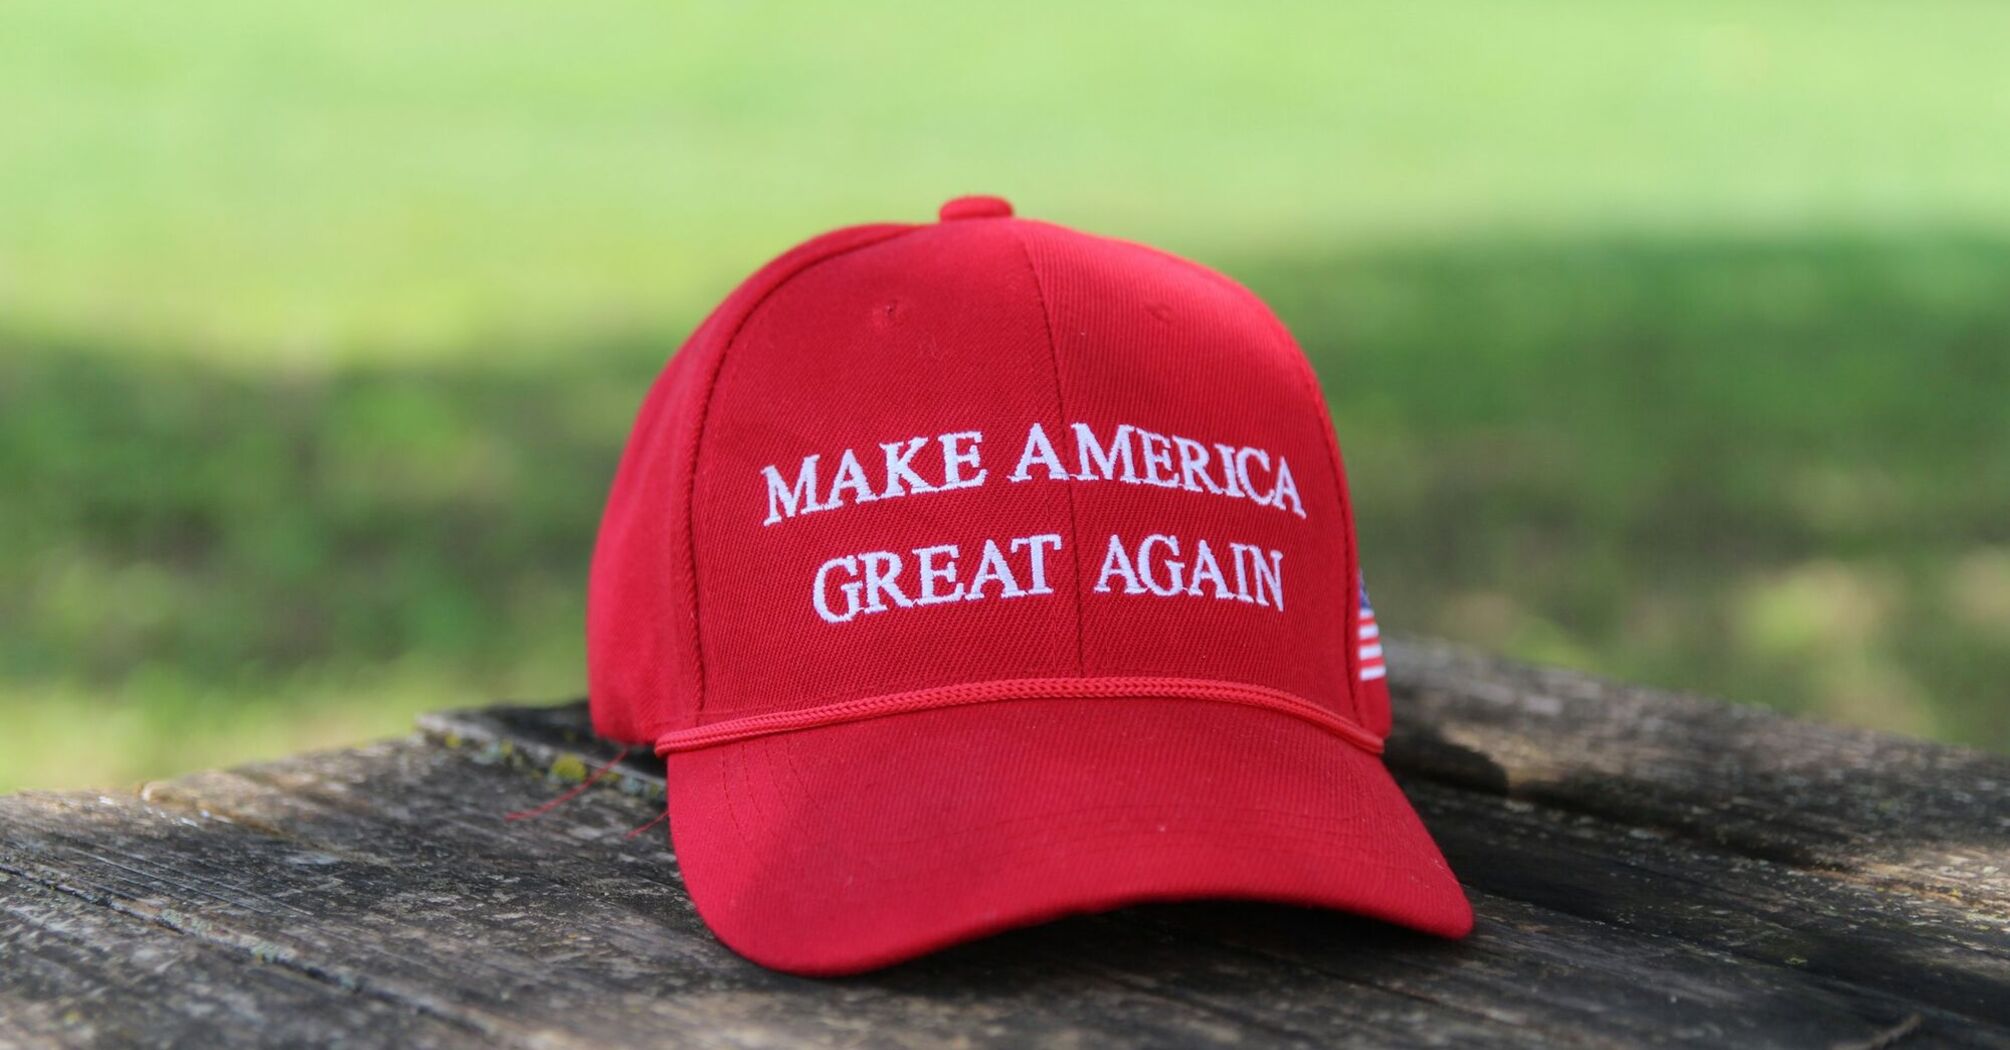 MAGA hat on a wooden surface